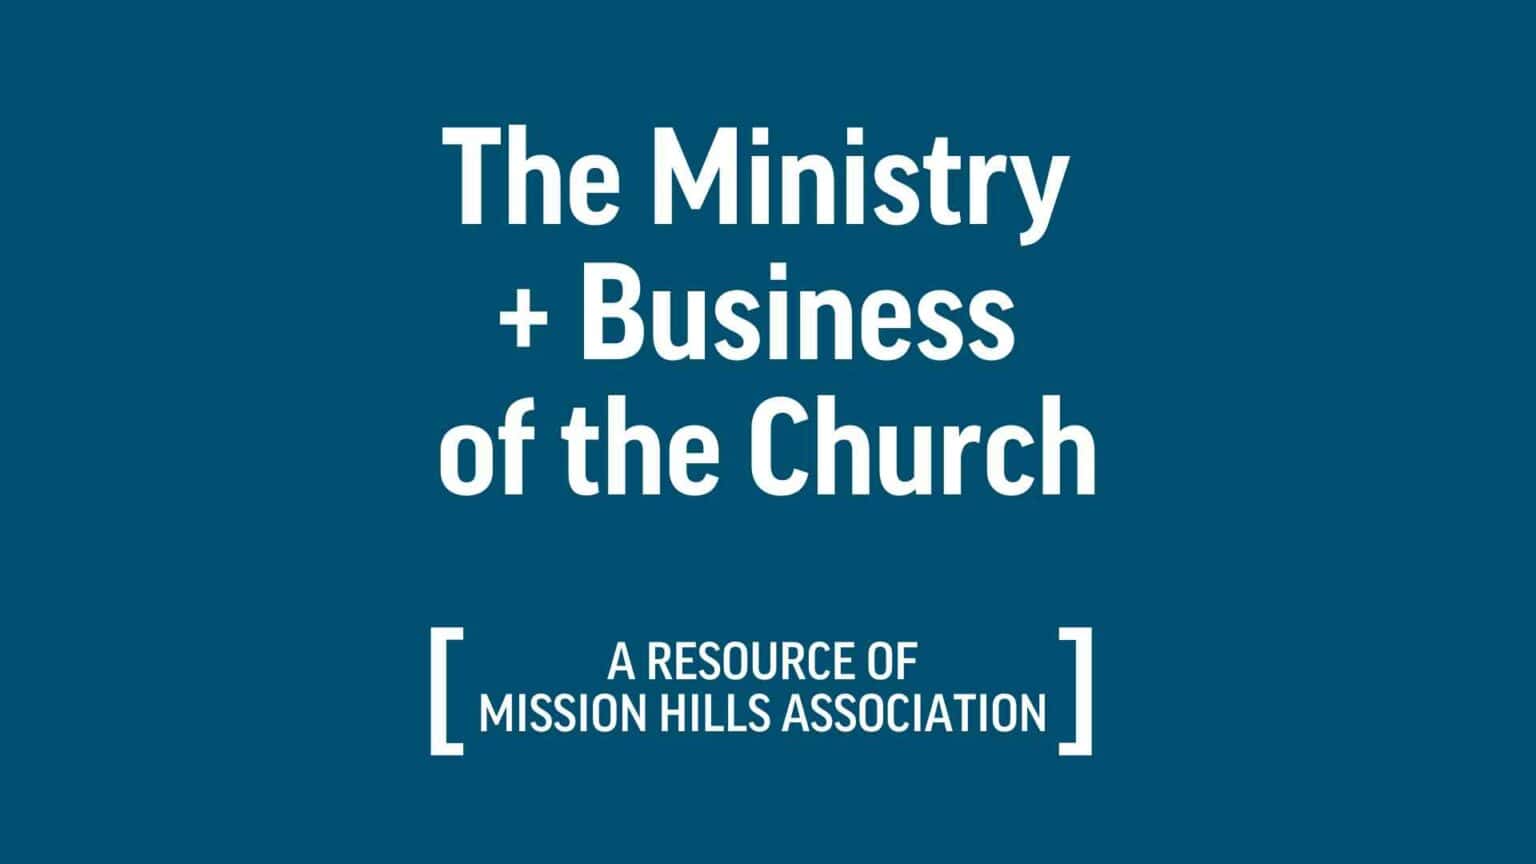 The Ministry + Business of the Church